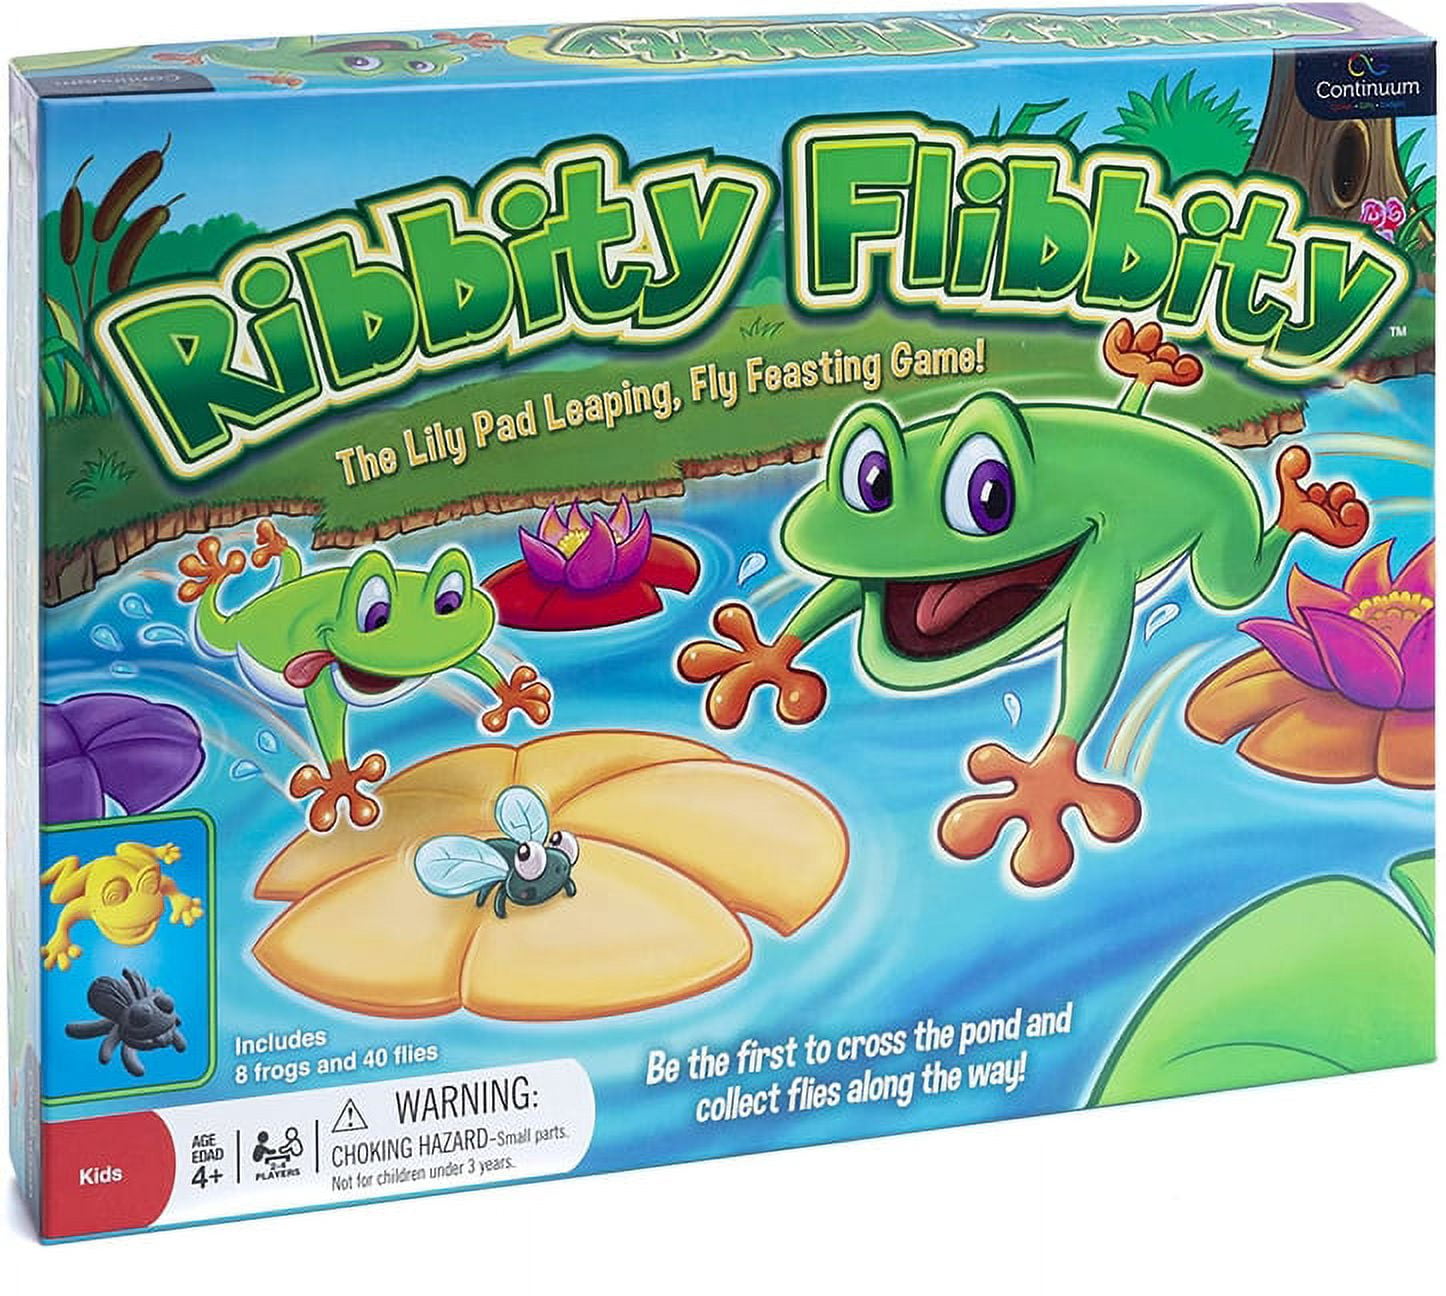 Ribbity Flibbity, the Lily Pad Leaping, Fly Feasting Game (Other)